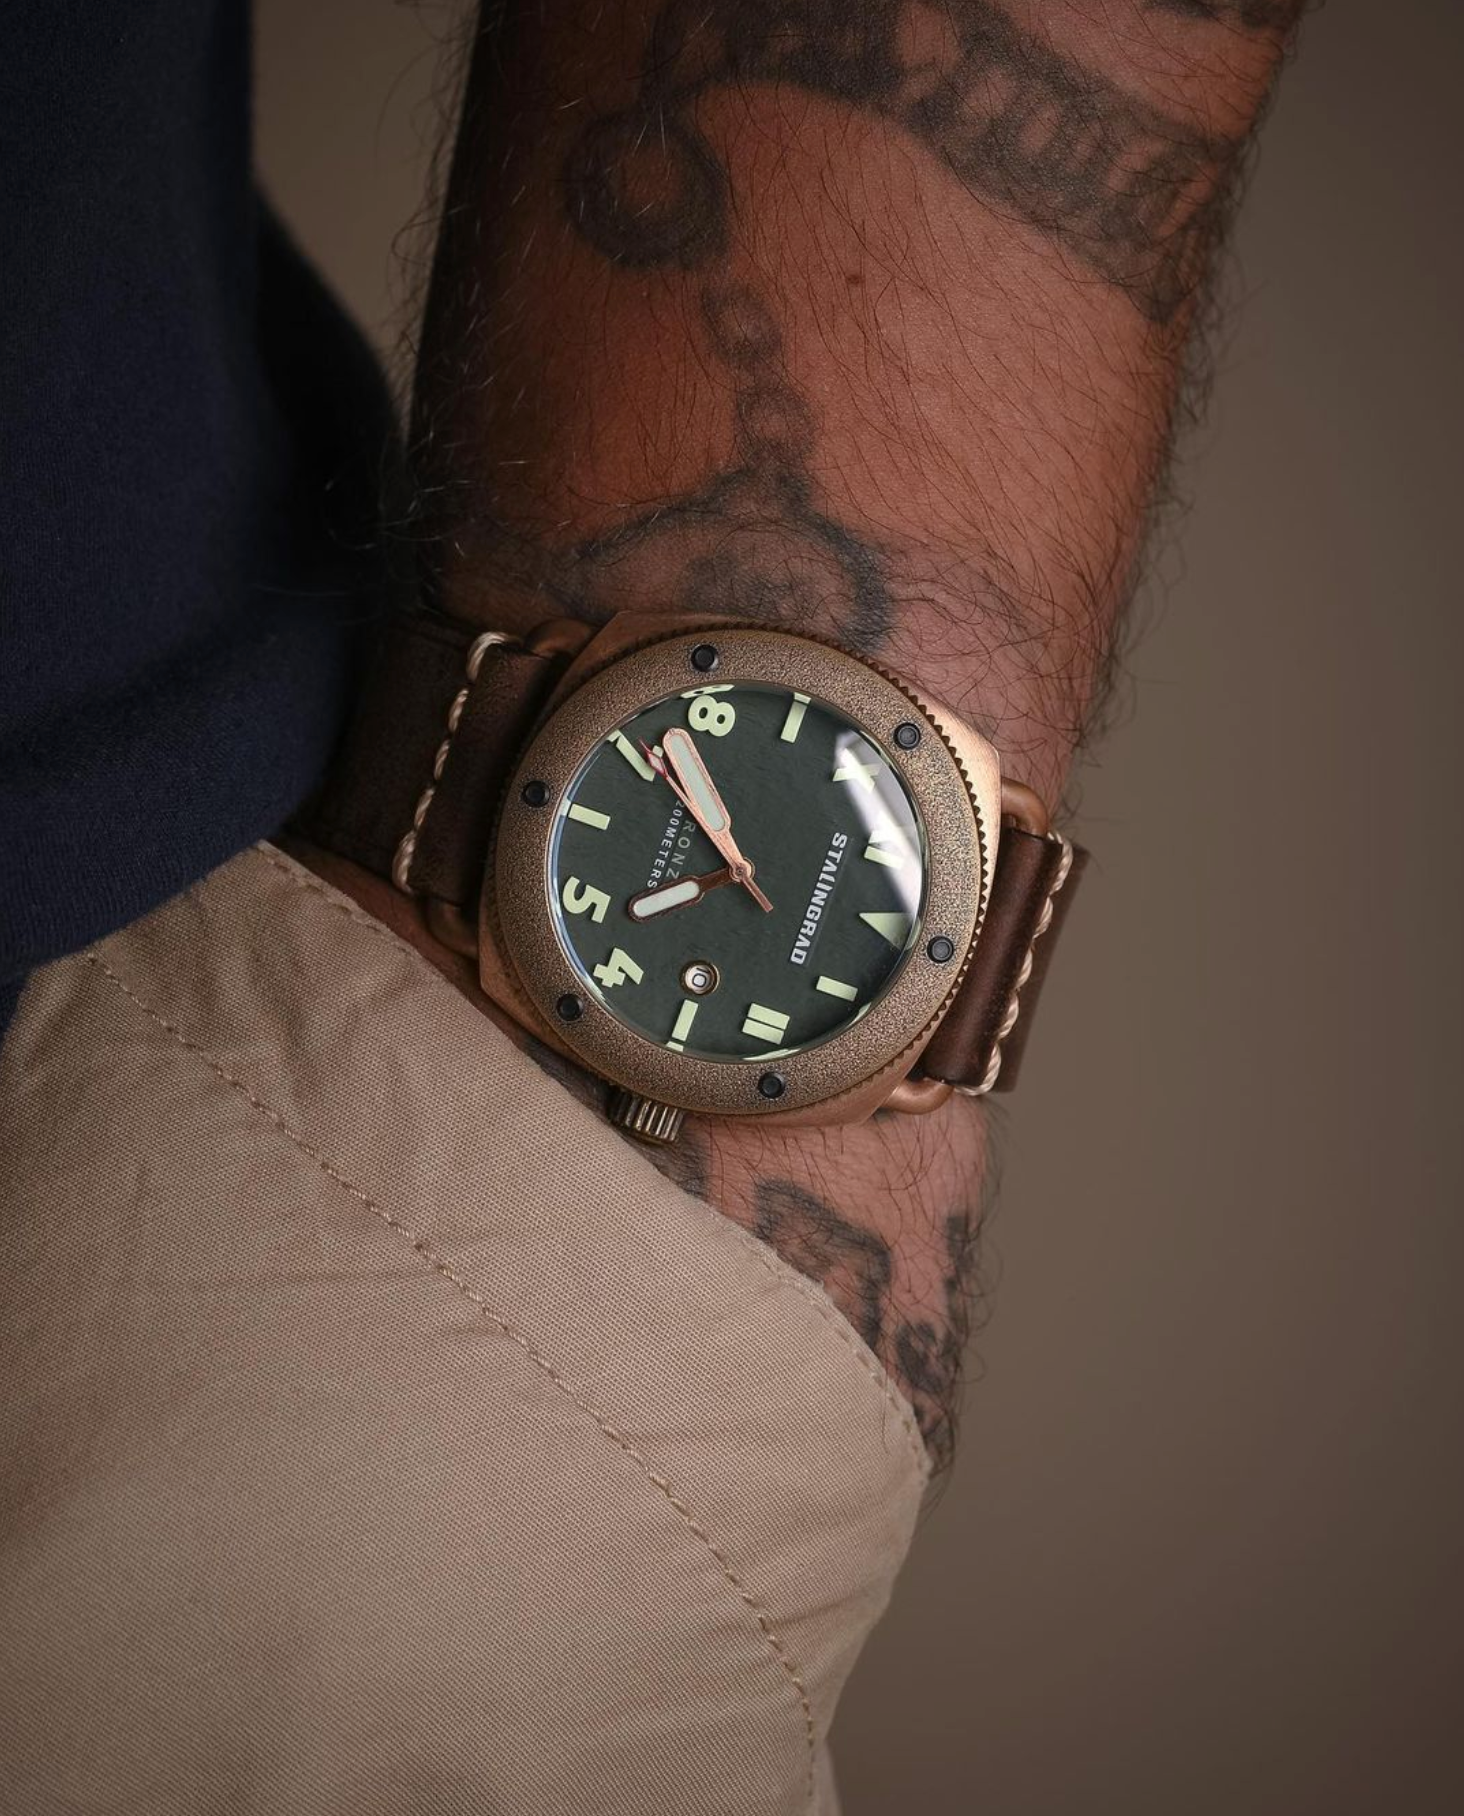 Stalingrad Bronze Watch Defender 200m WR Green dial on a man with tattoos, khaki pants and blue shirt